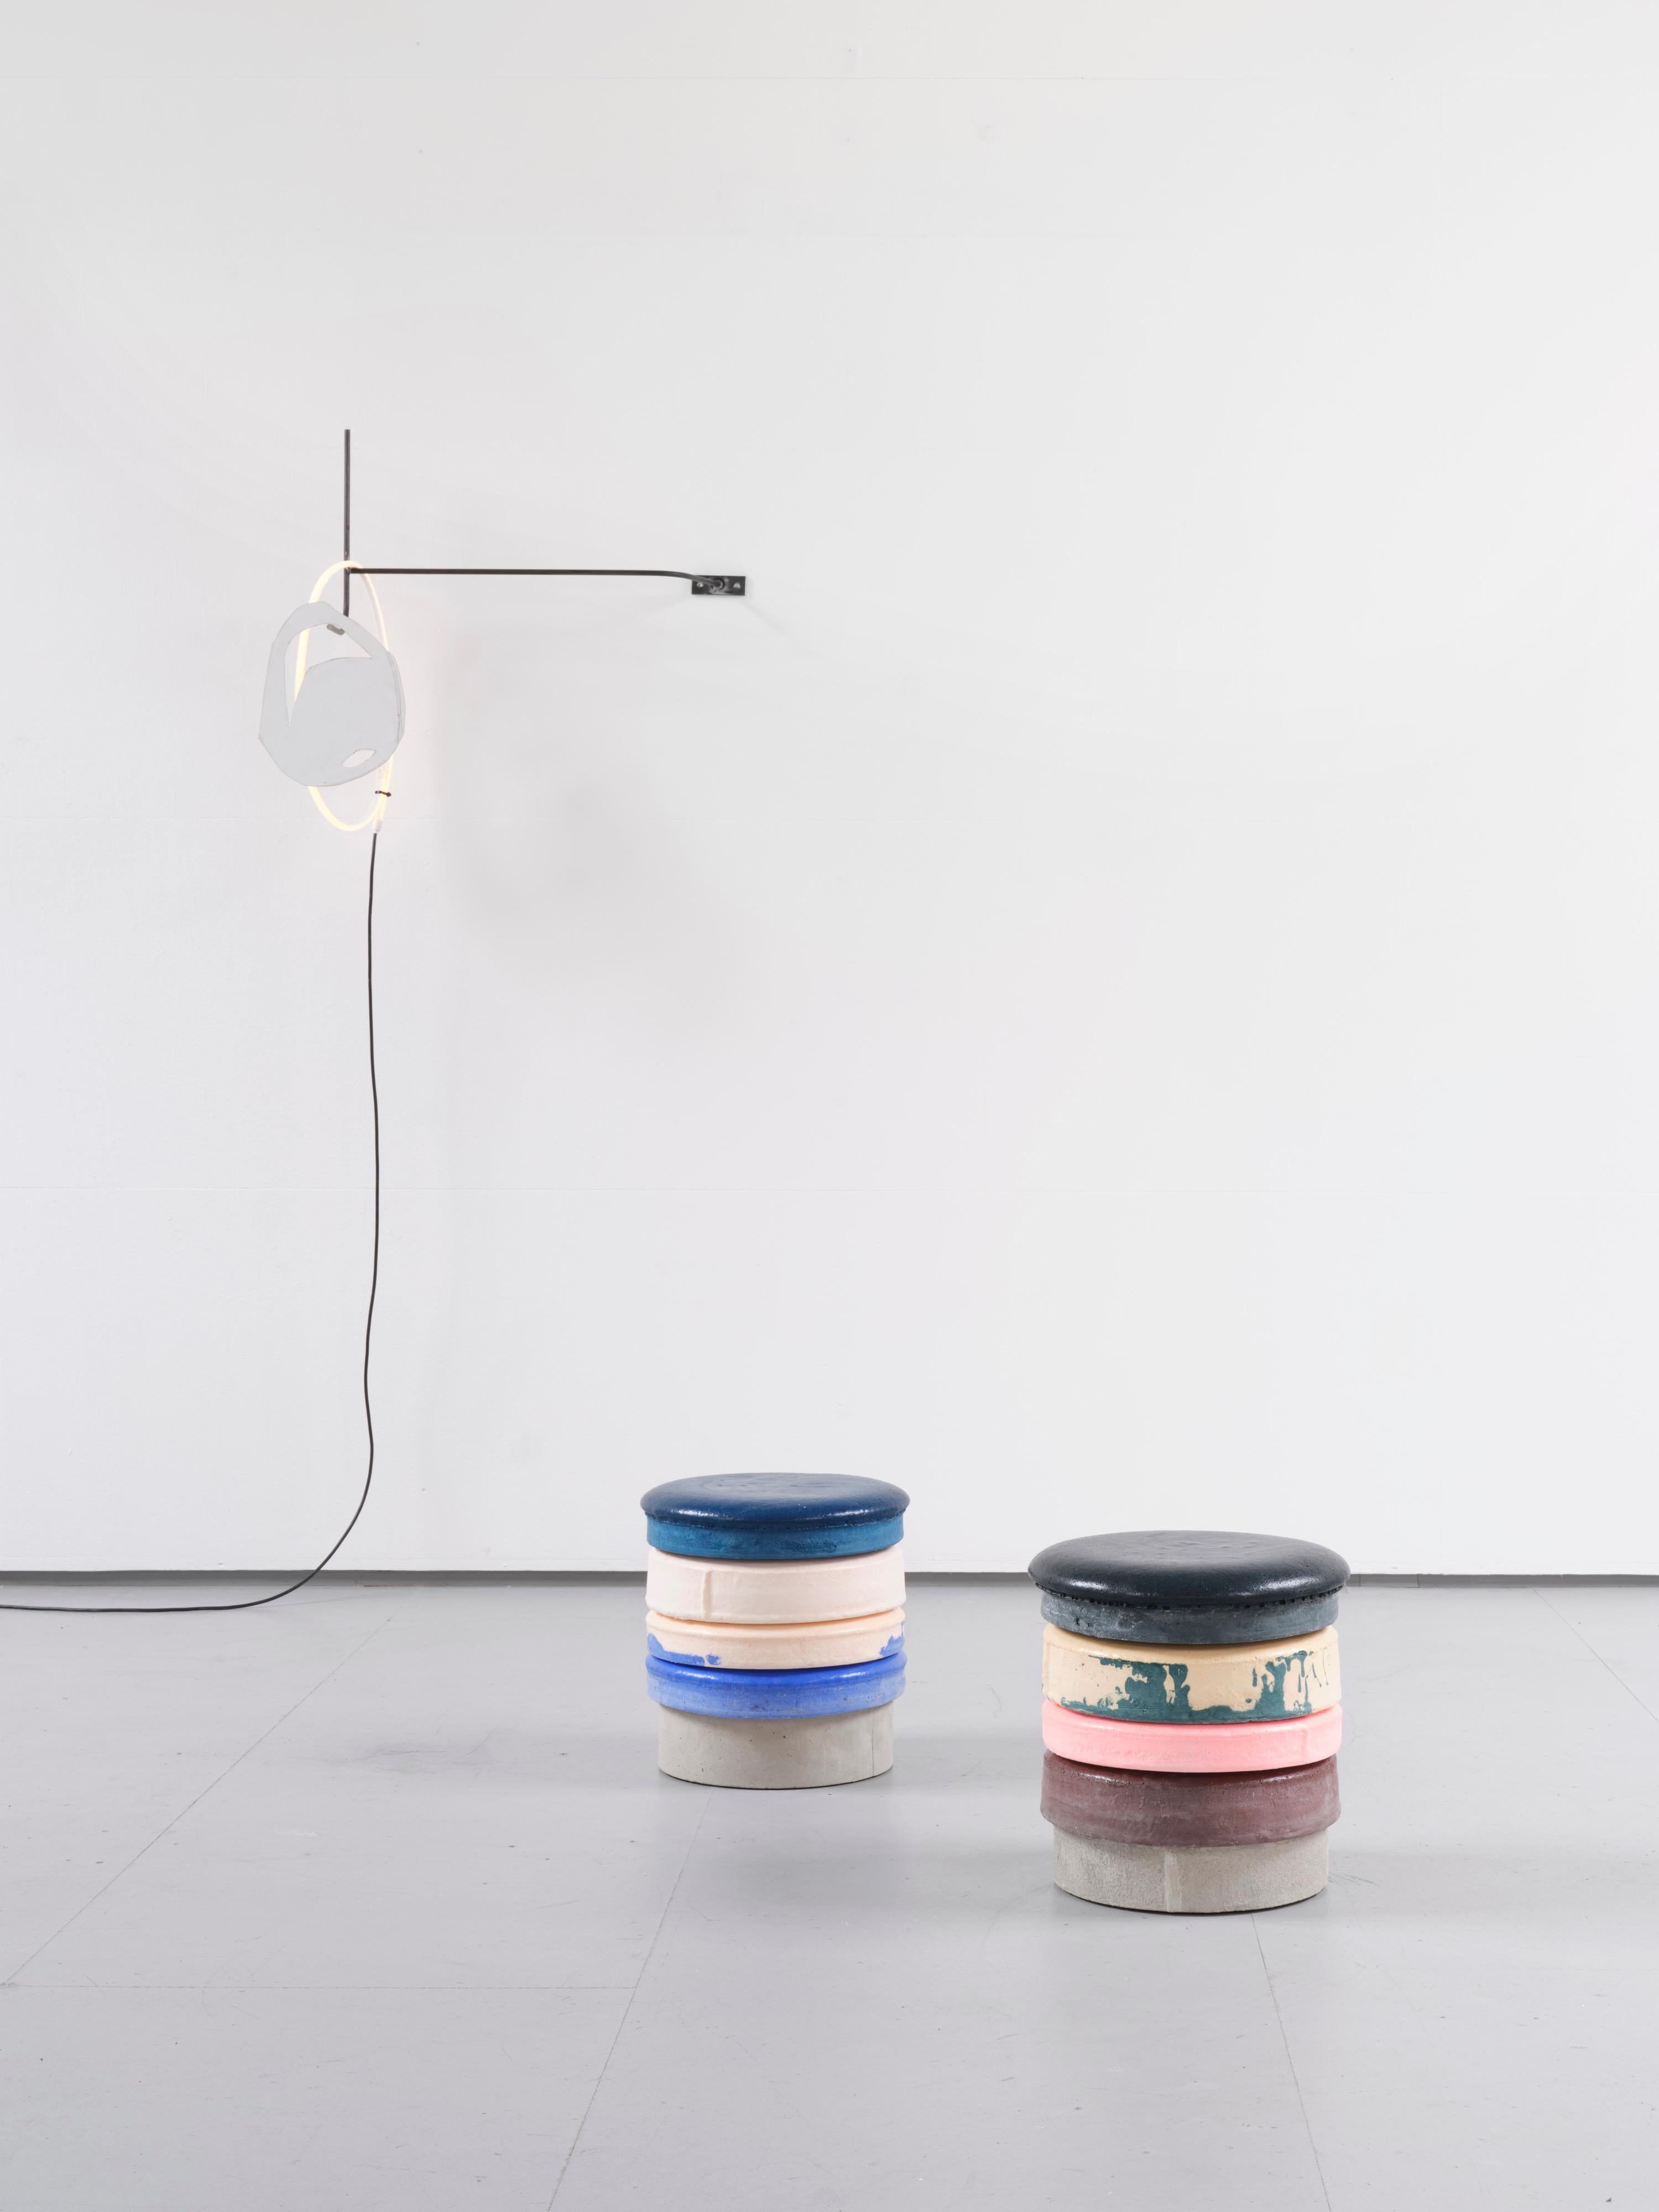 Plastic Contemporary 'Macaron' Stool by Cristian Andersen